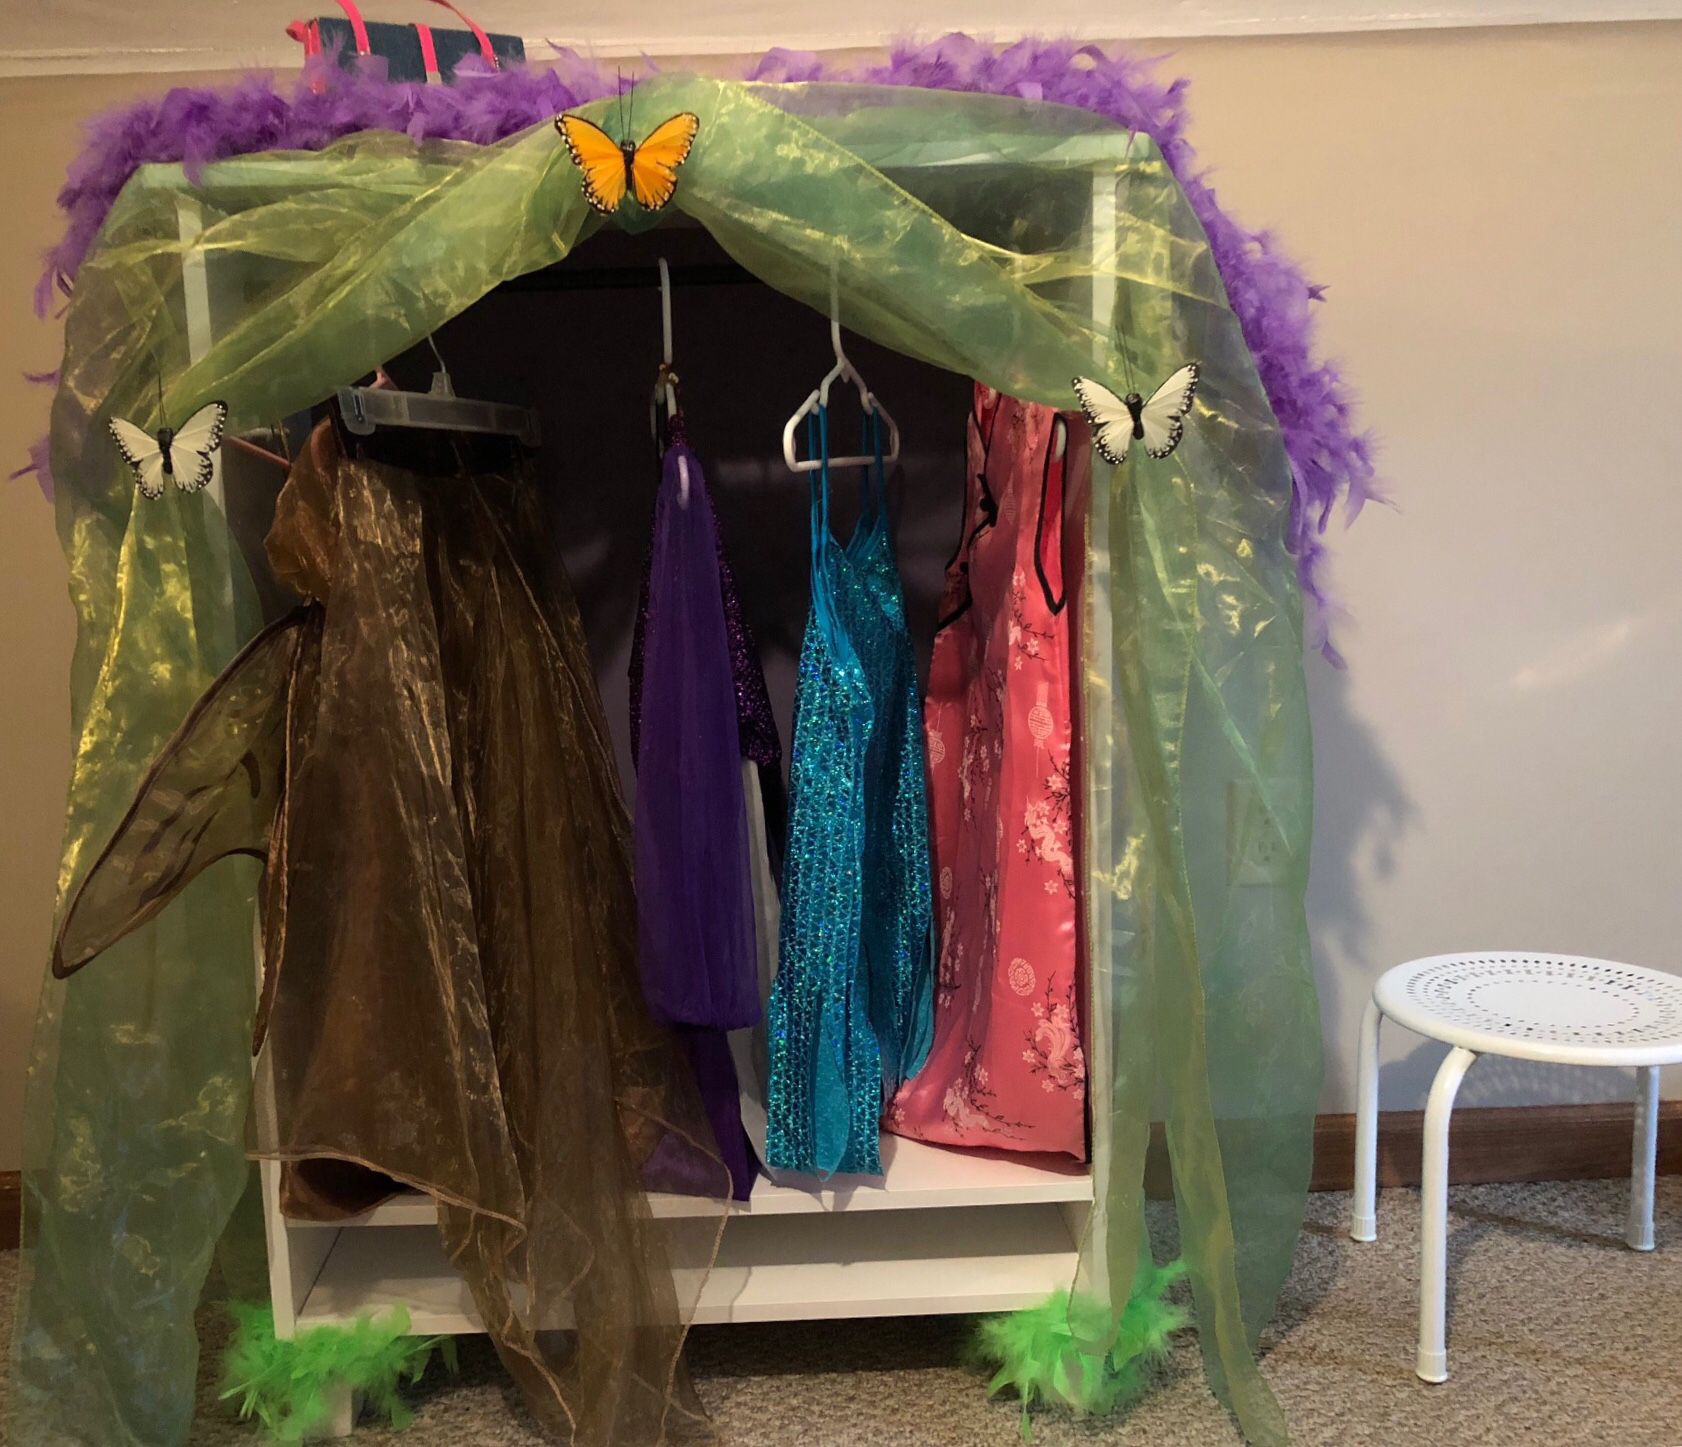 Princess Dress-Up Cabinet - Includes costumes.